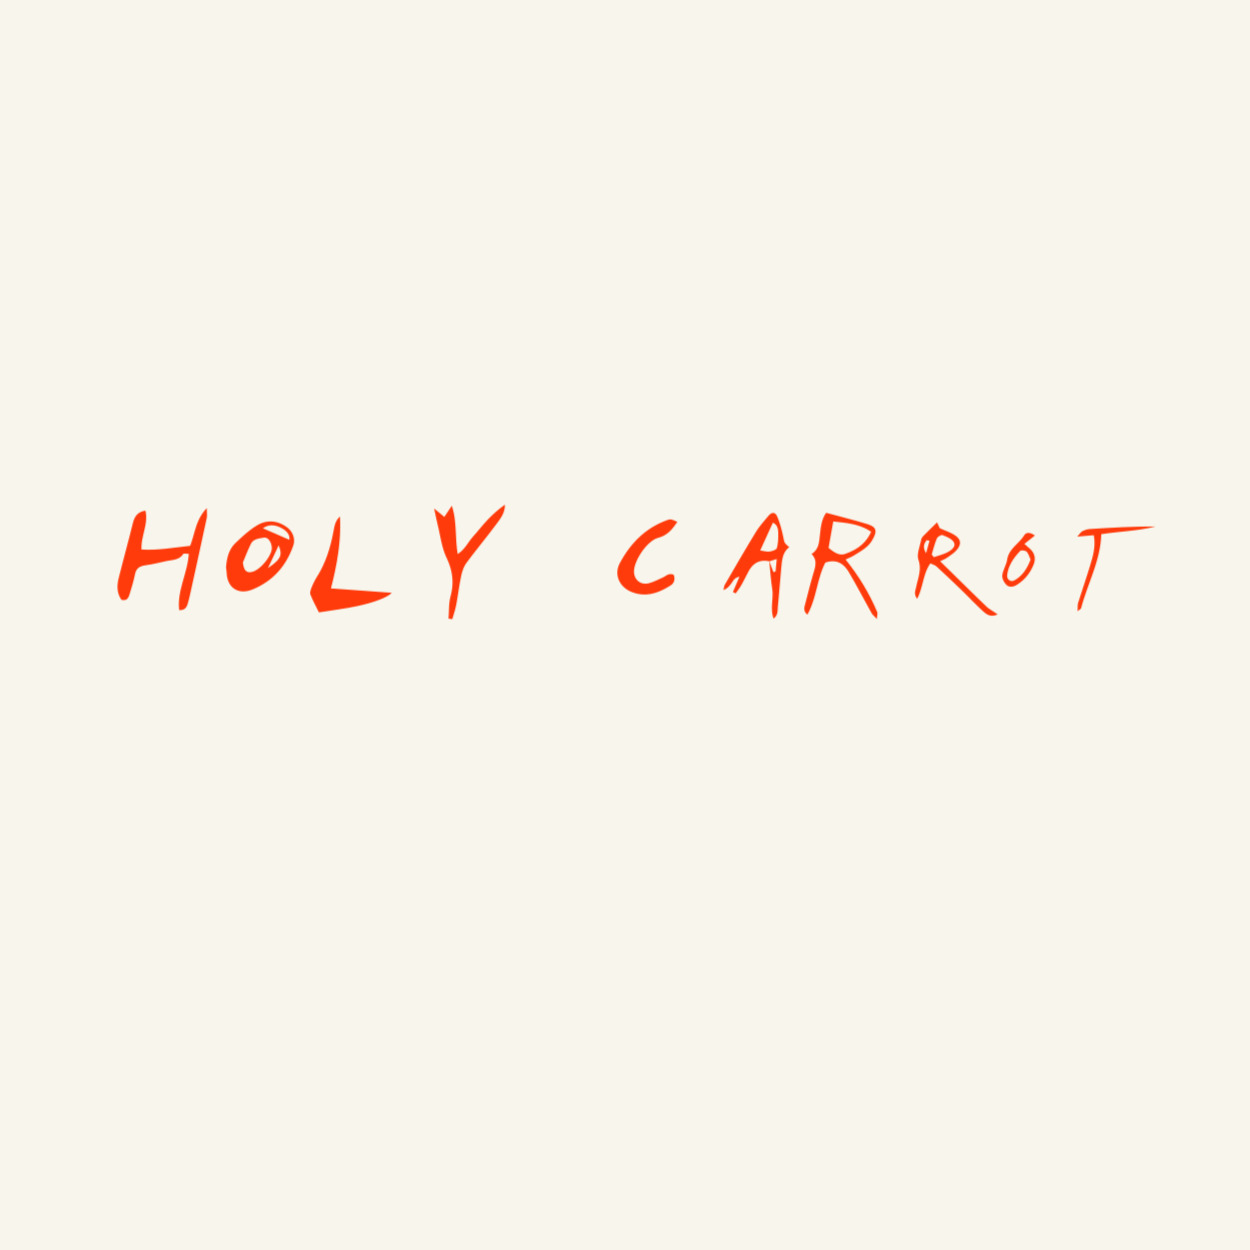 The Holy Carrot Events